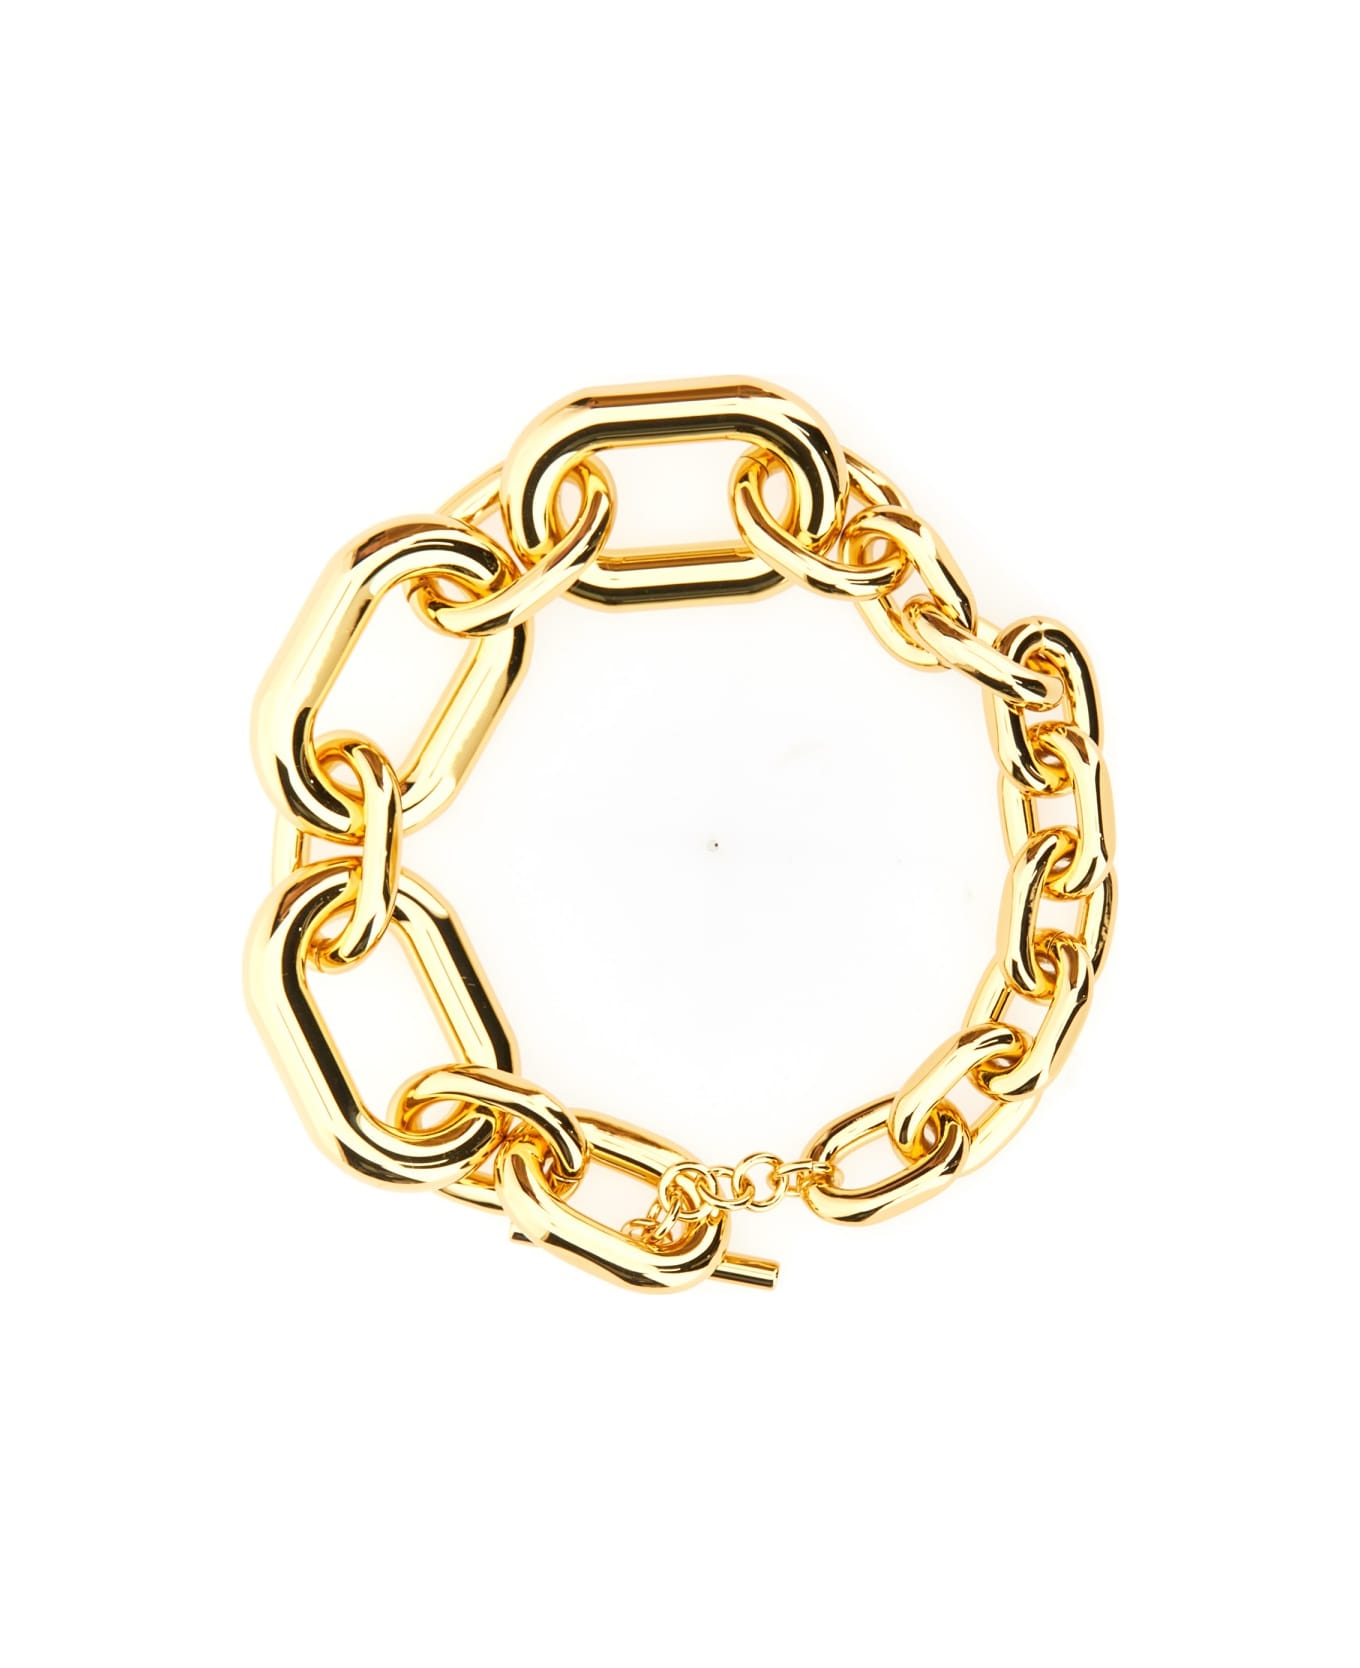 Paco Rabanne 'xl Link' Necklace - GOLD